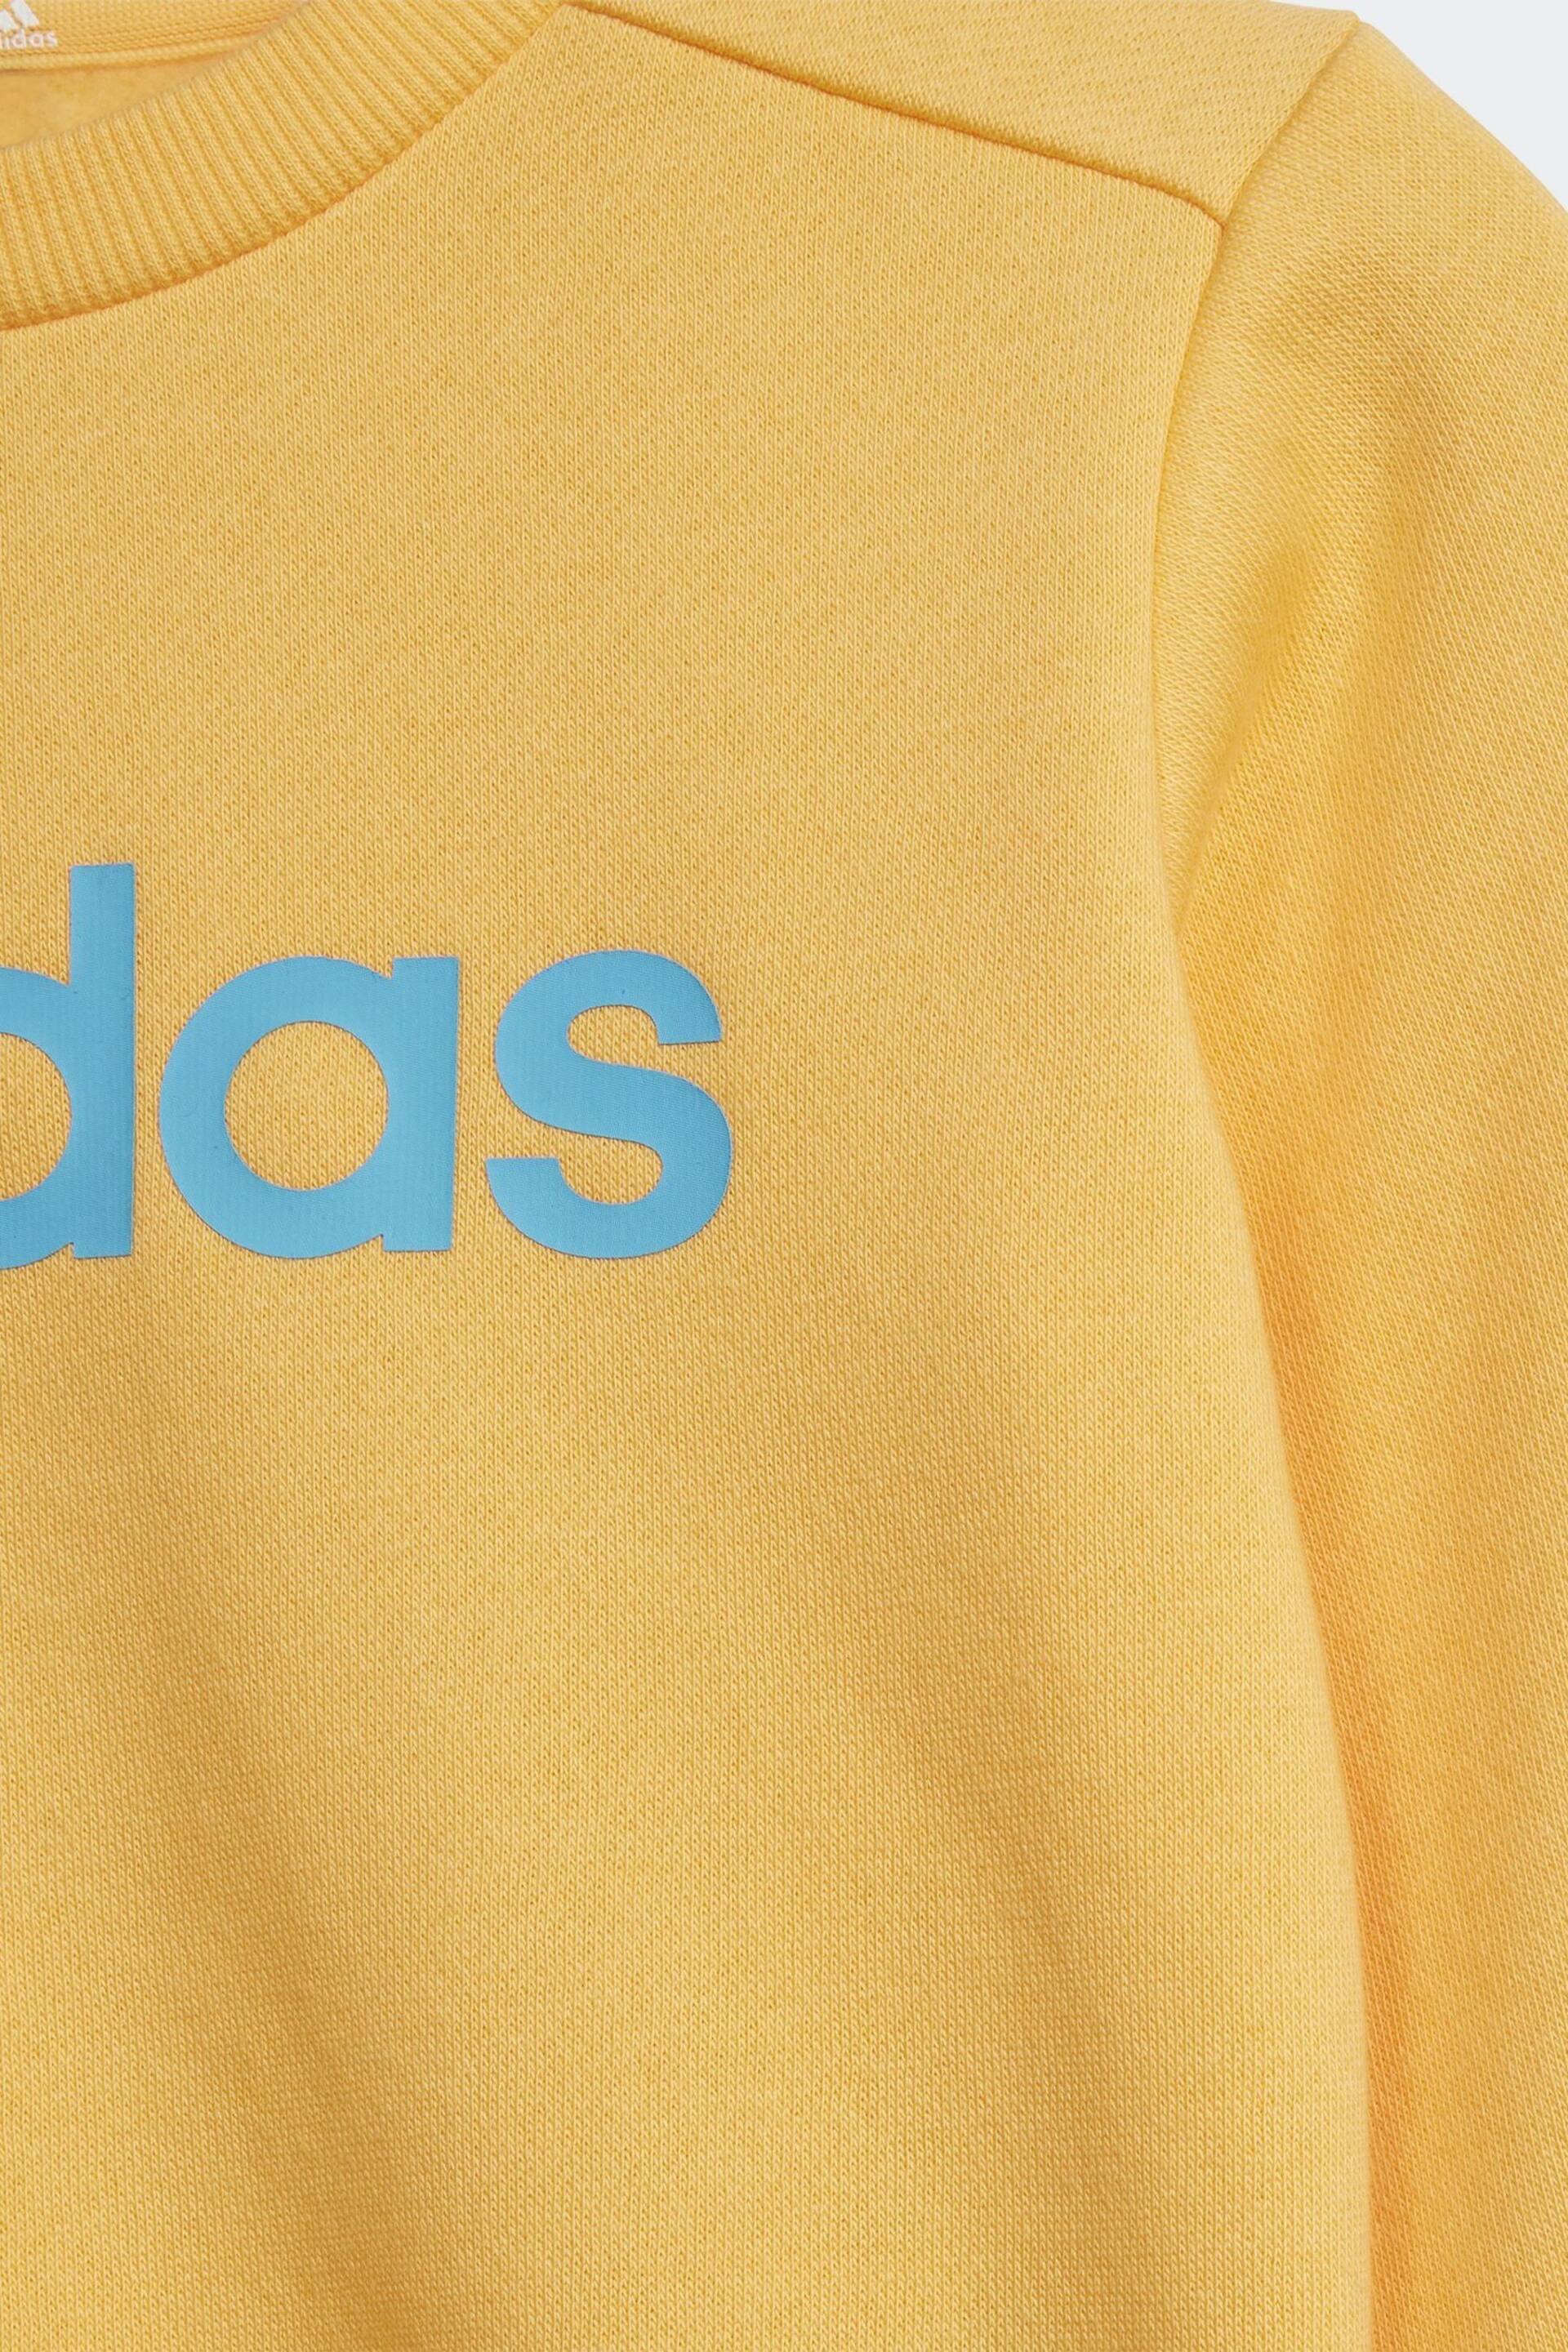 adidas Yellow/Blue Sportswear Essentials Lineage Joggers Set - Image 5 of 6